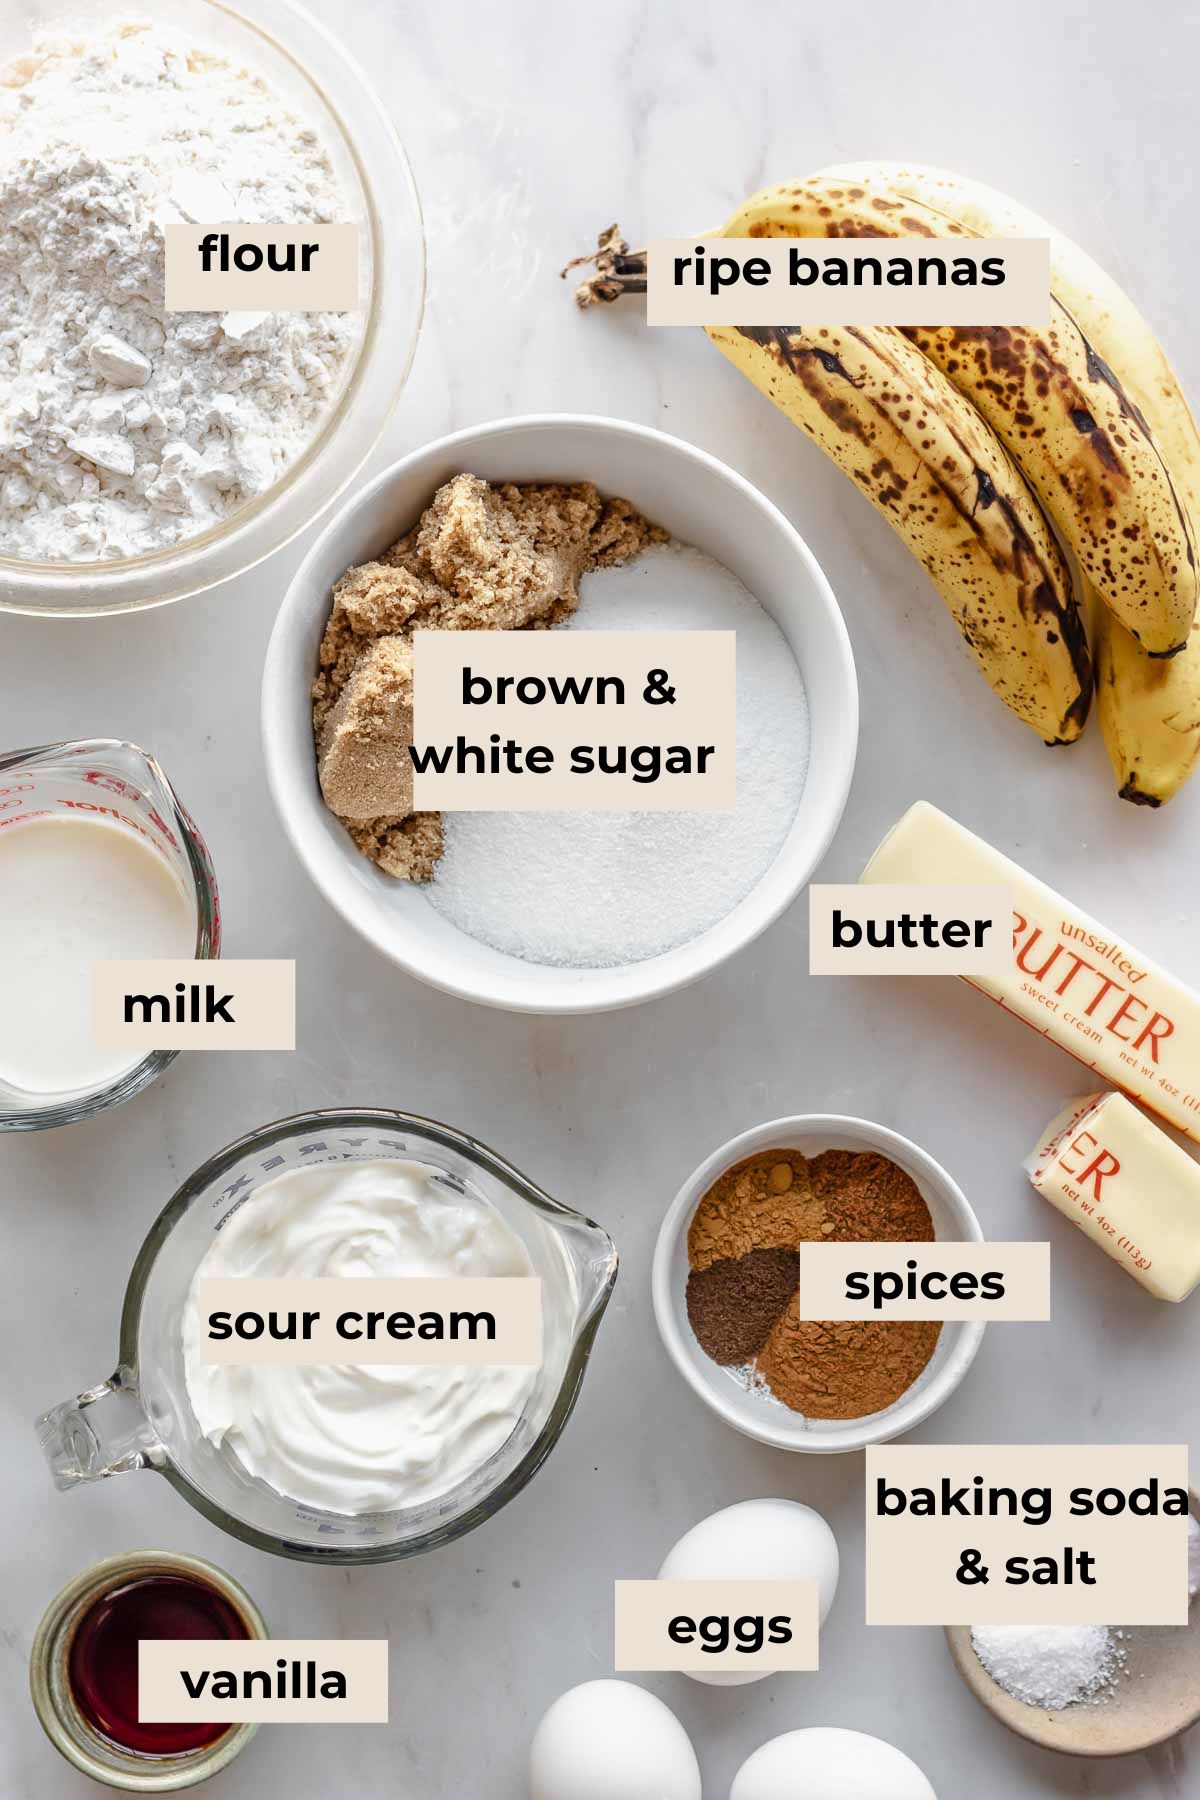 Ingredients for spiced banana cake